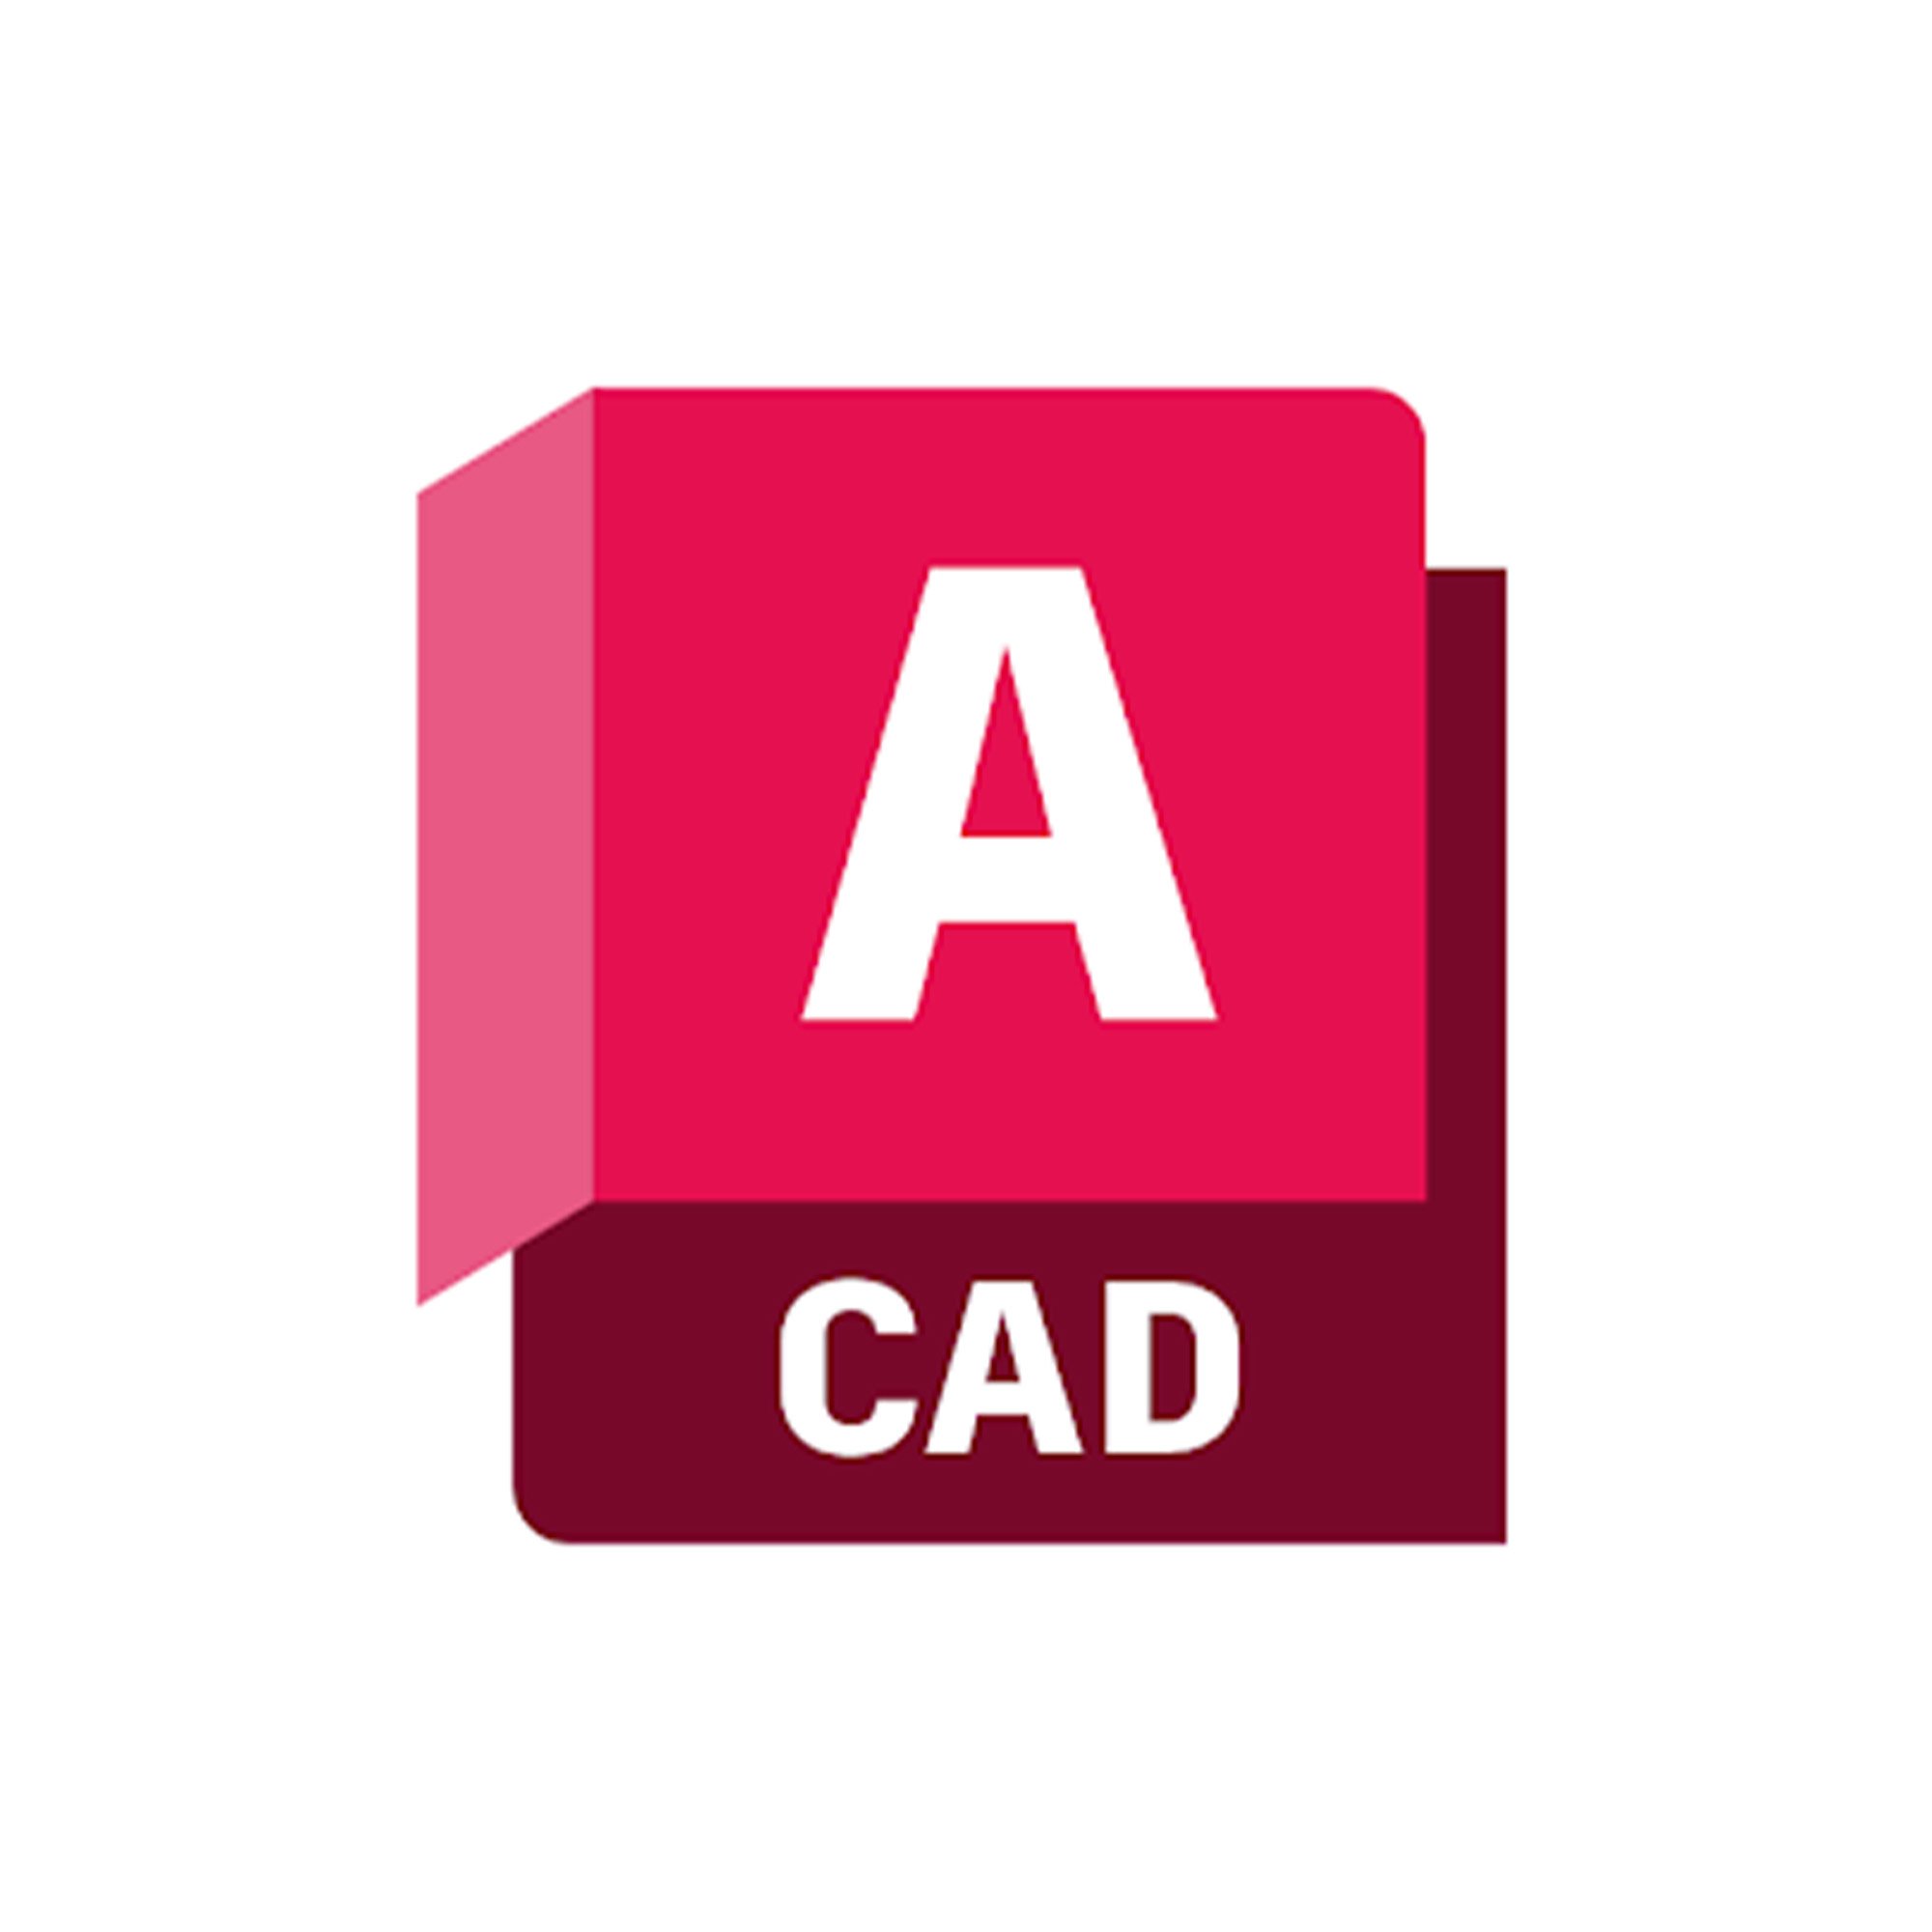 MM-427063_new-website-page_content -page-auto-cad_logo_2000x2000.jpg